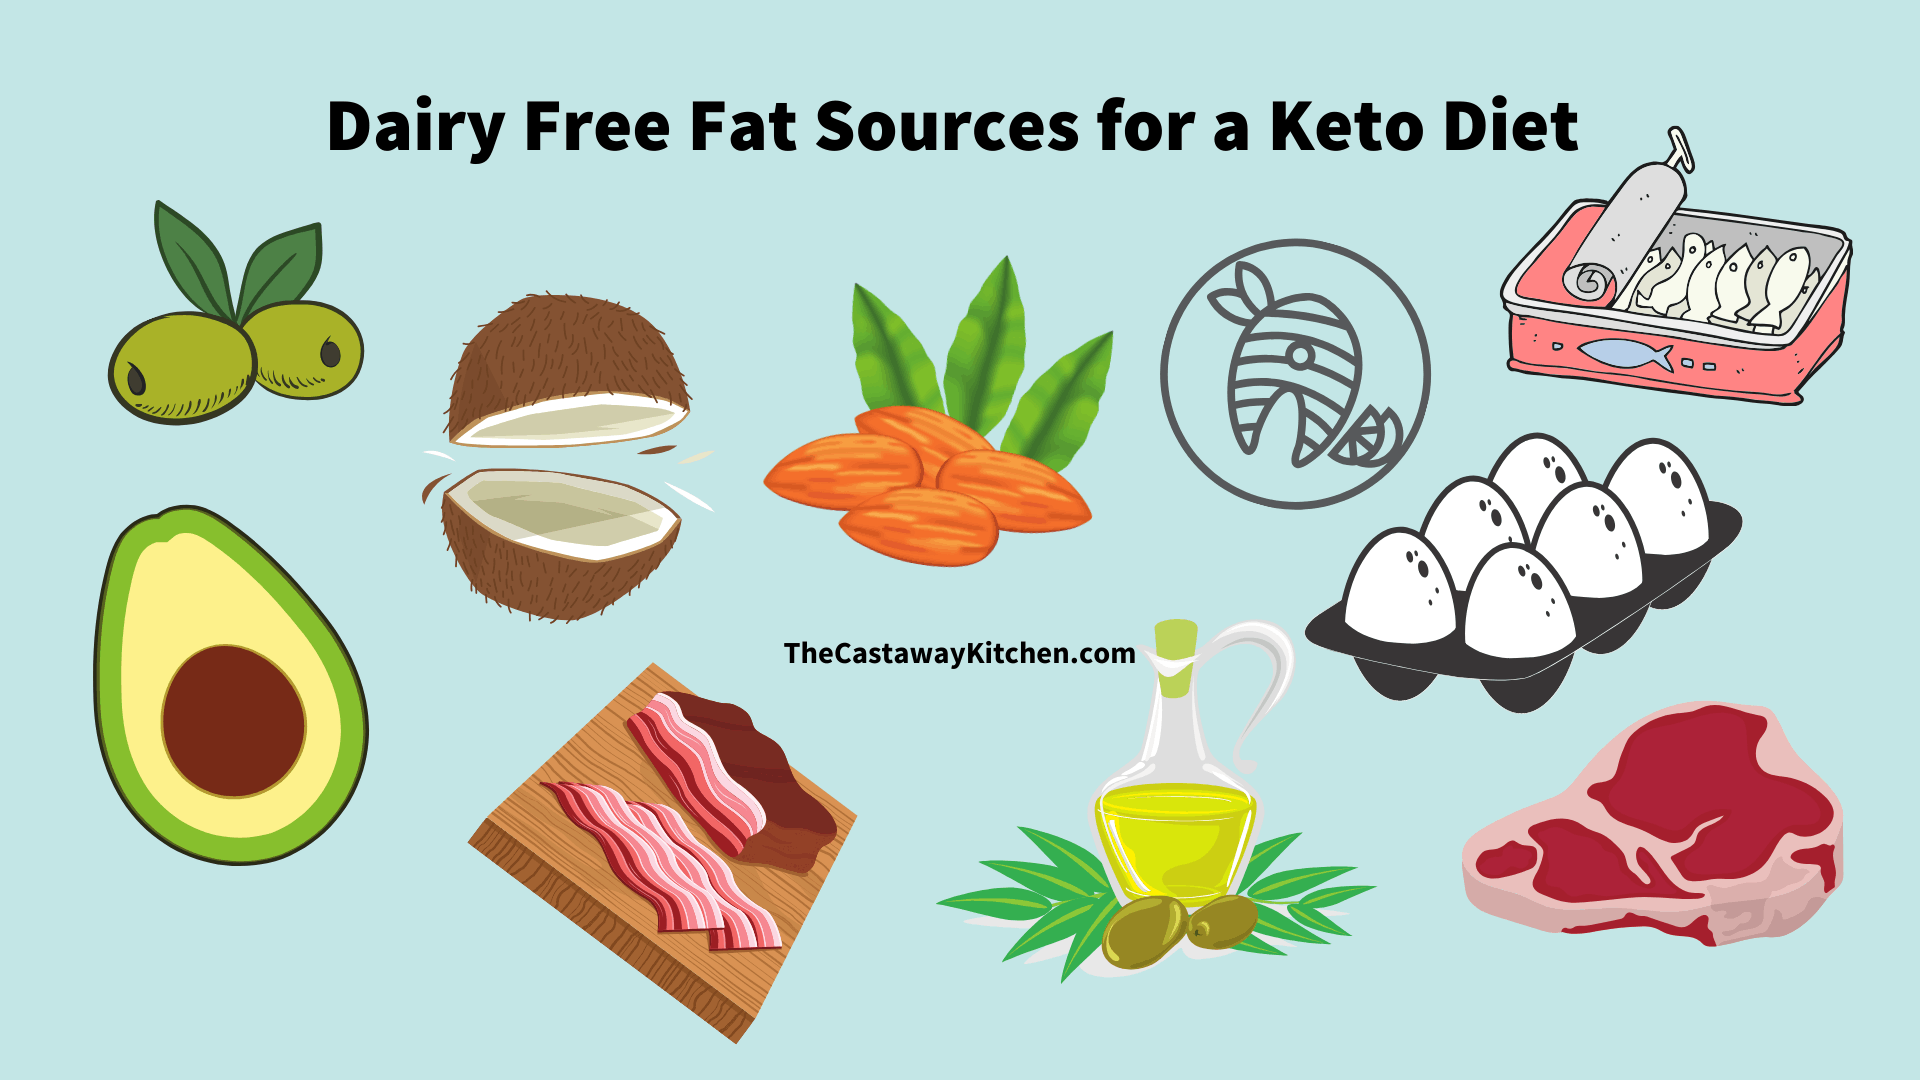 How To Do Keto Dairy Free: a quick start guide. The Castaway Kitchen